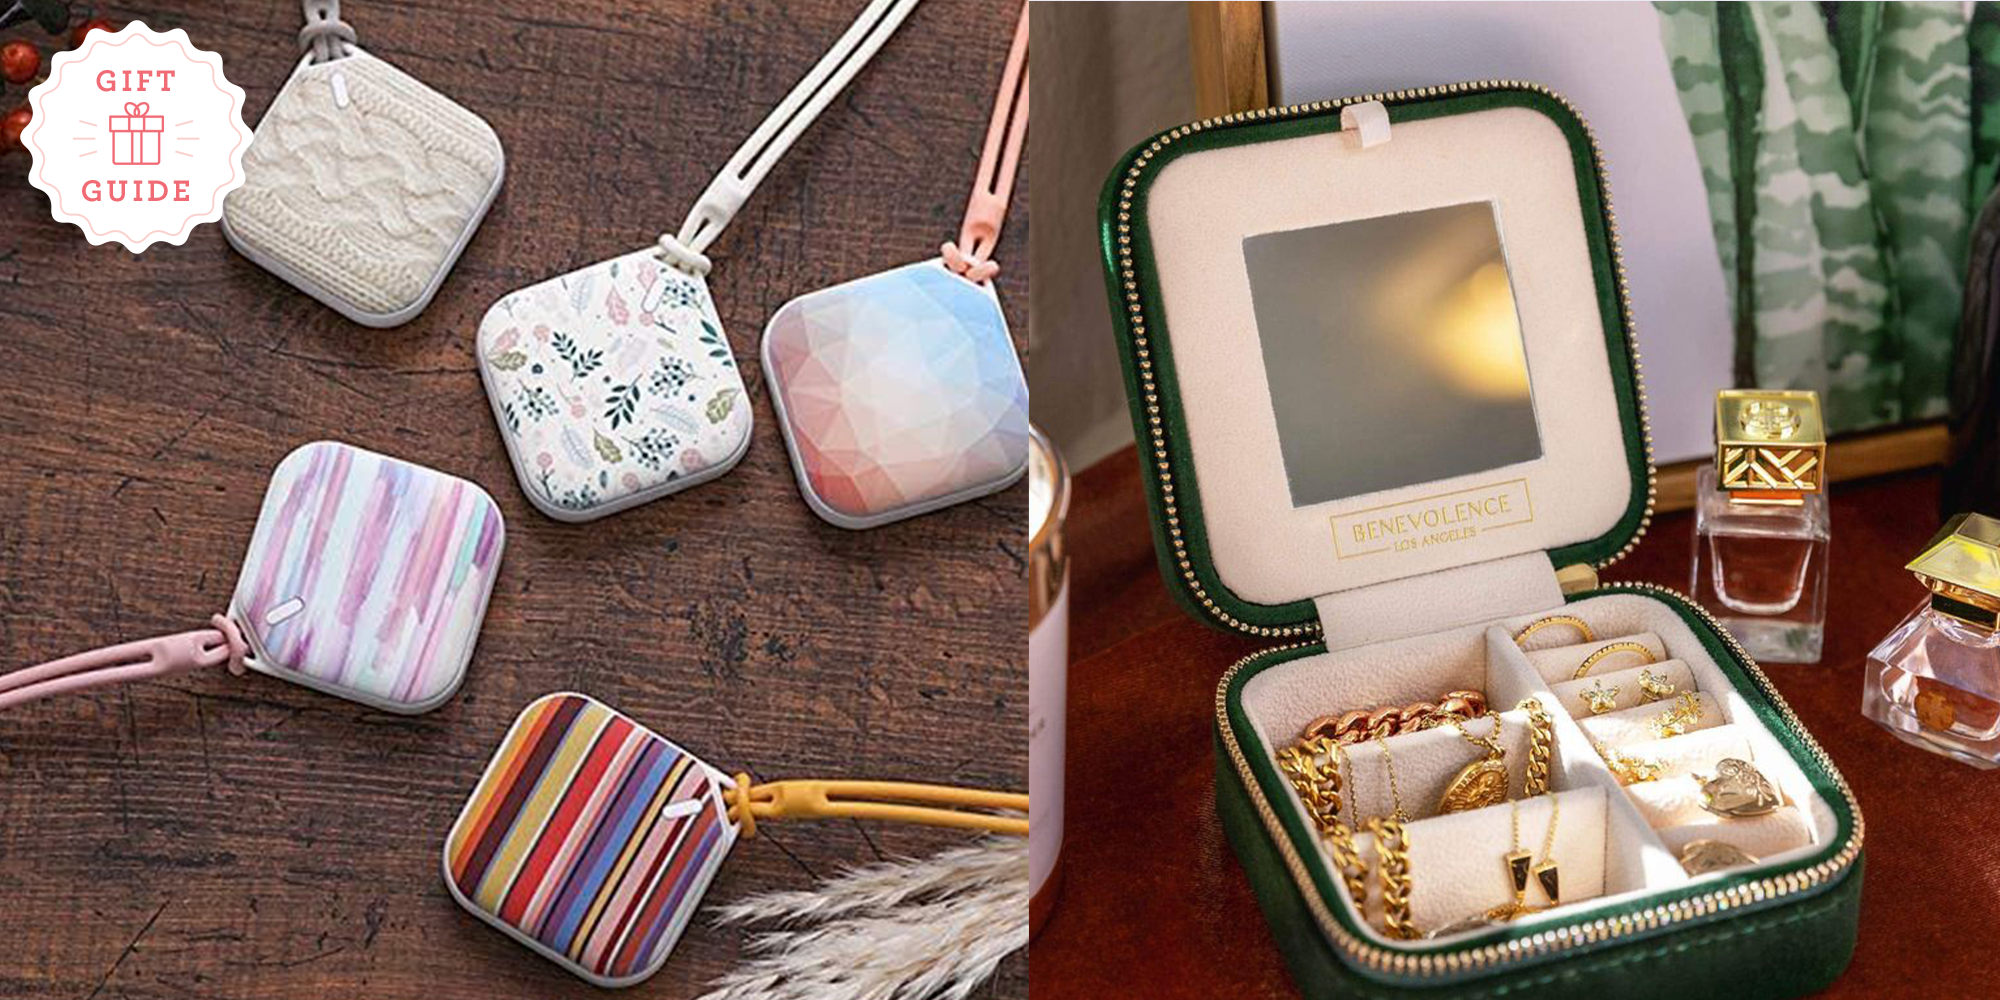 45 Affordable Secret Santa Gifts That Are Practical and Meaningful